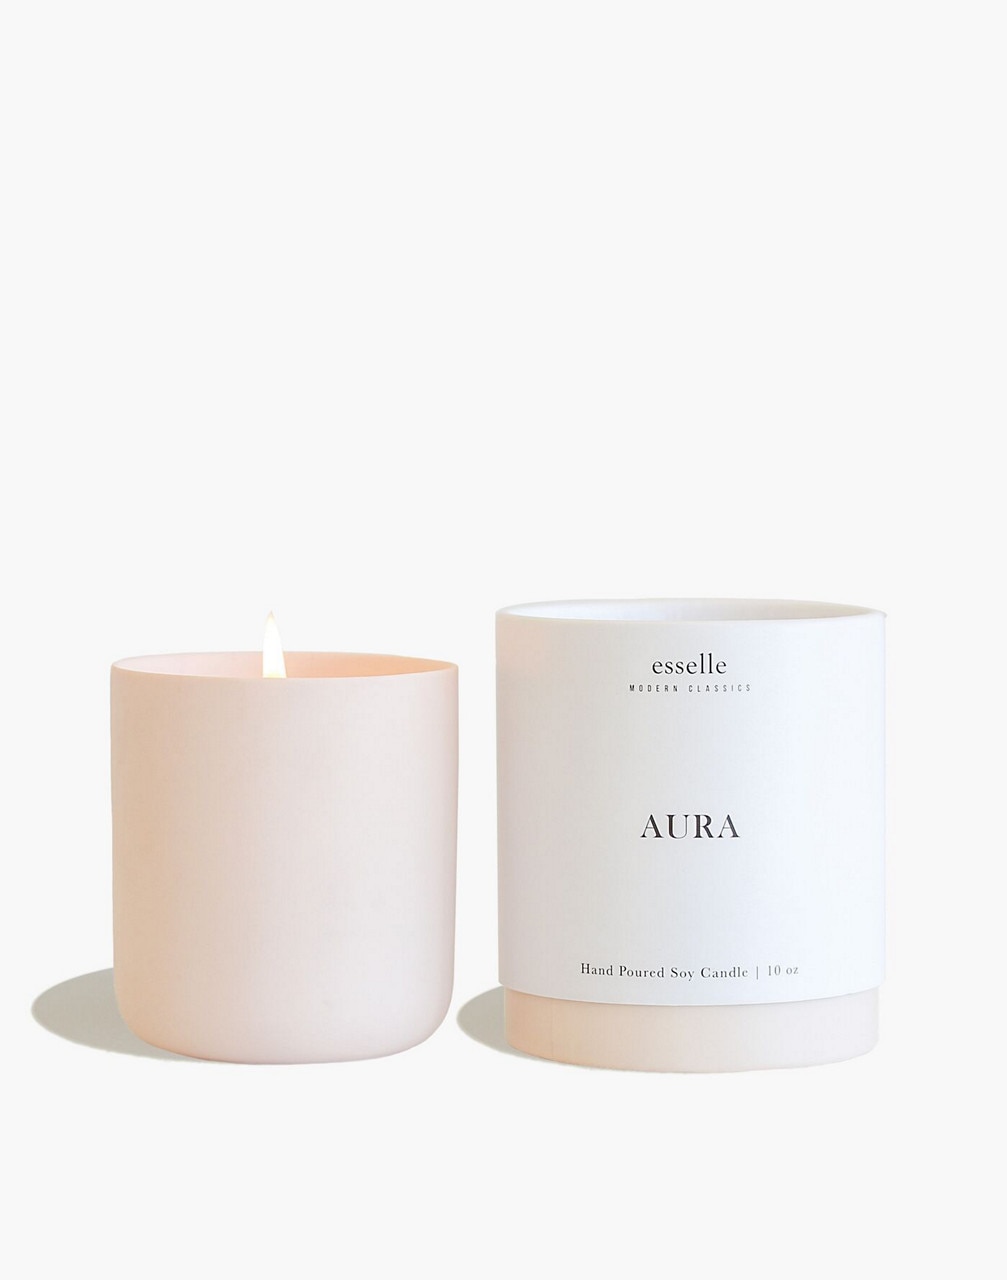 Candles for Fireplace Display Awesome Aura Collection by Esselle Sf Candle Candles